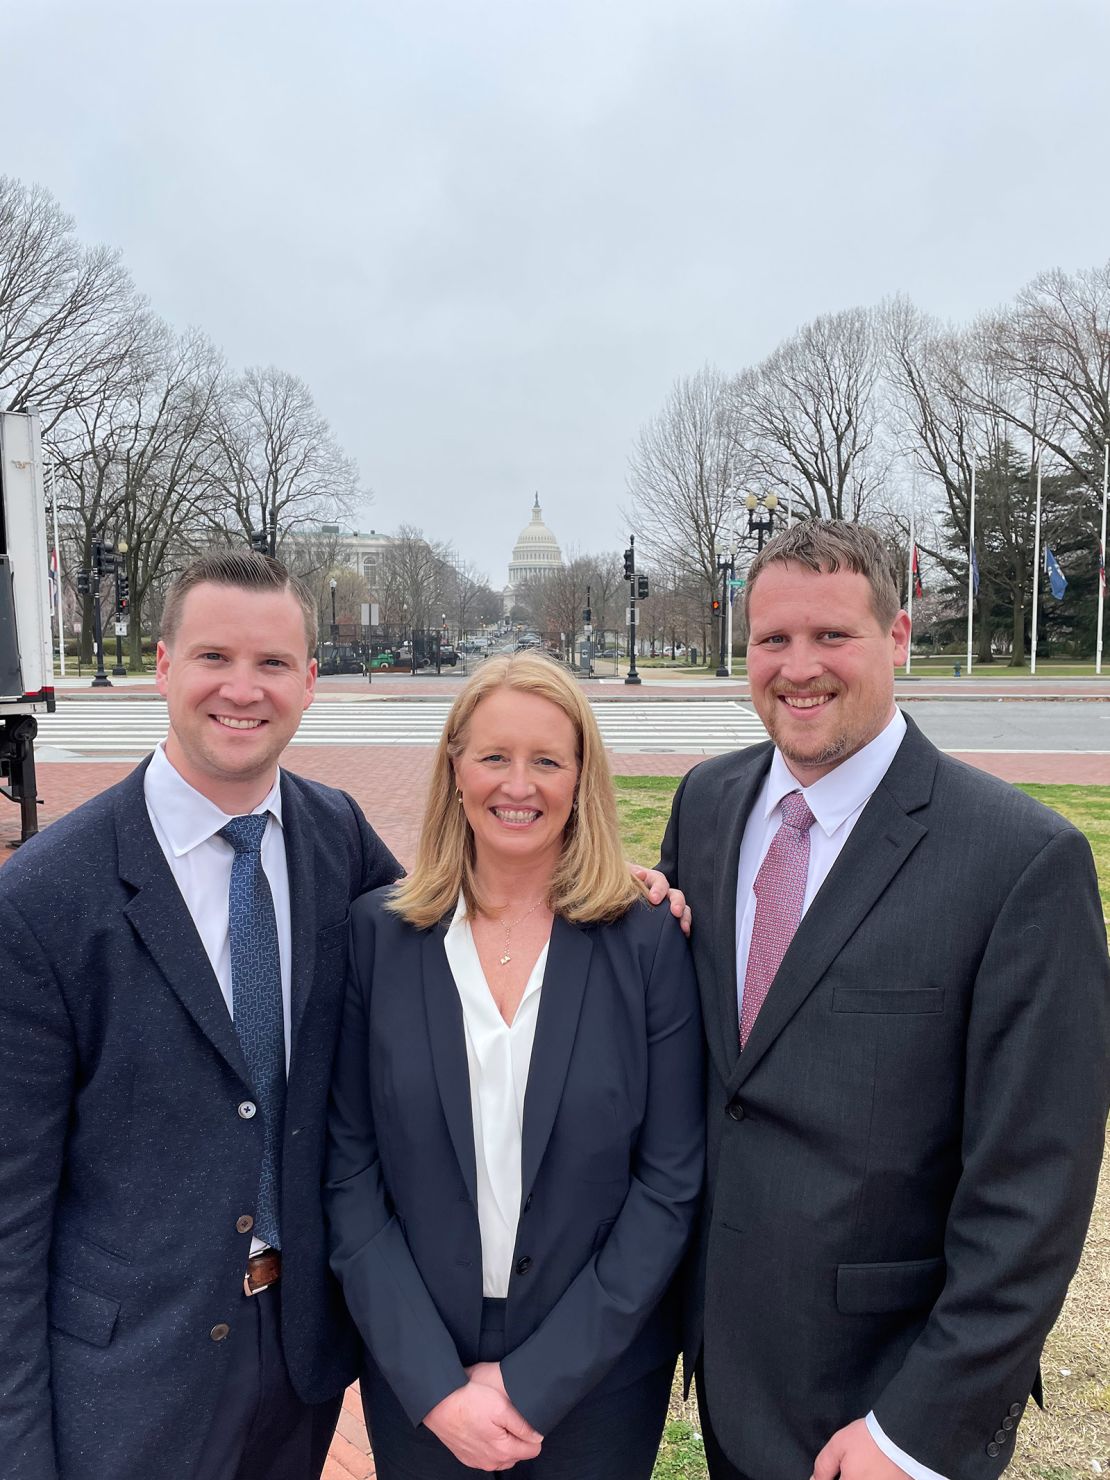 Deanne Criswell with her sons in Washington, DC for her Senate confirmation hearing.